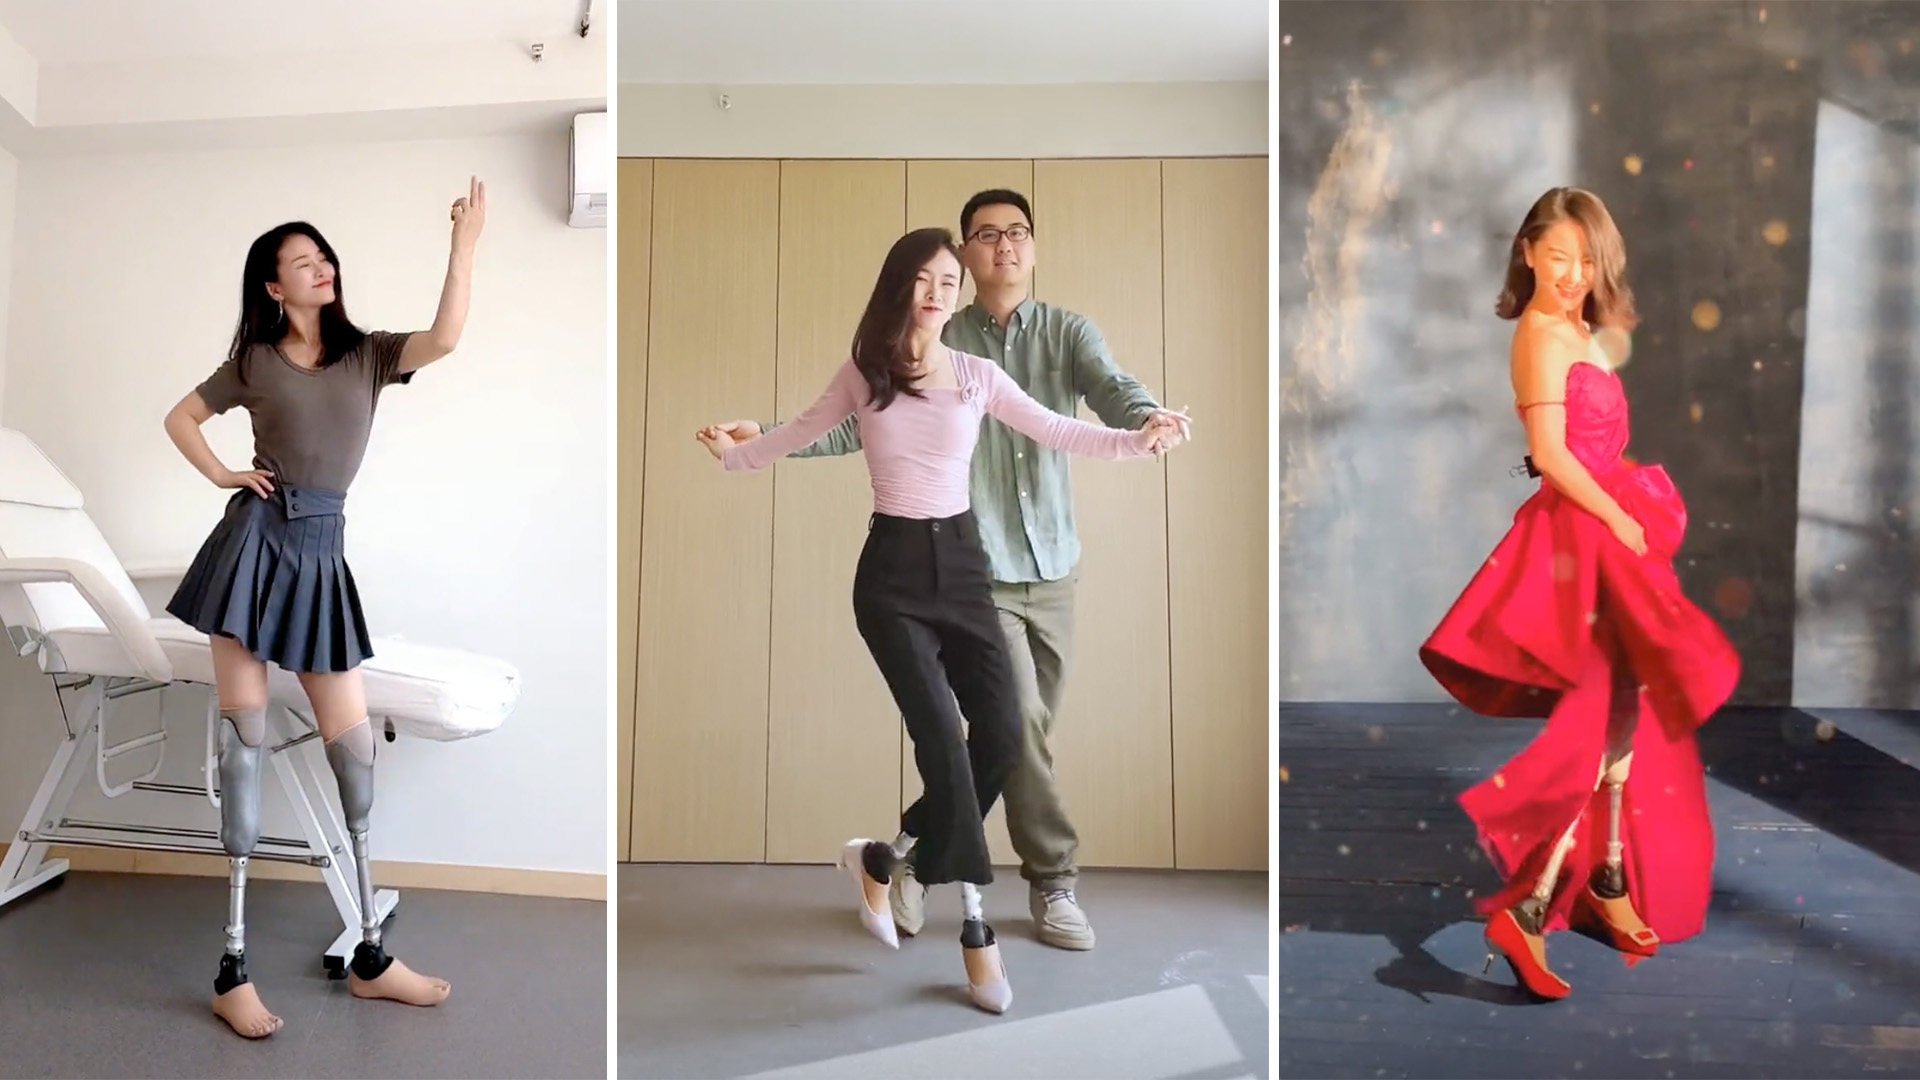 A Chinese earthquake victim who lost both her legs says dancing in high heels again, made possible by artificial limbs designed by her husband, brings her so much joy. Photo: SCMP Composite.